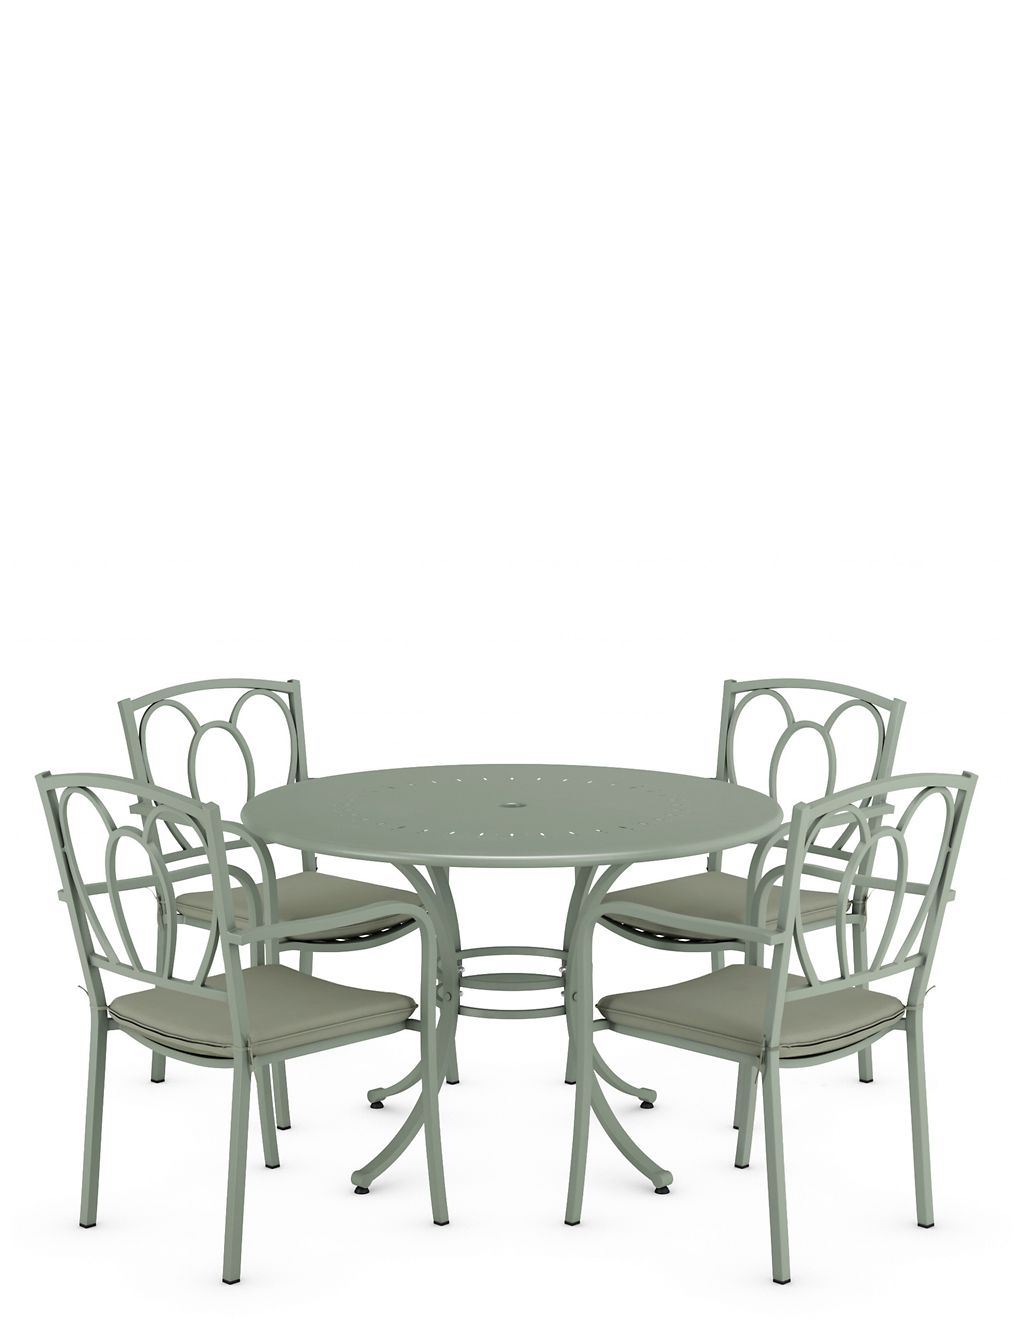 Stroud 4 Seater Garden Table & Chairs 1 of 6